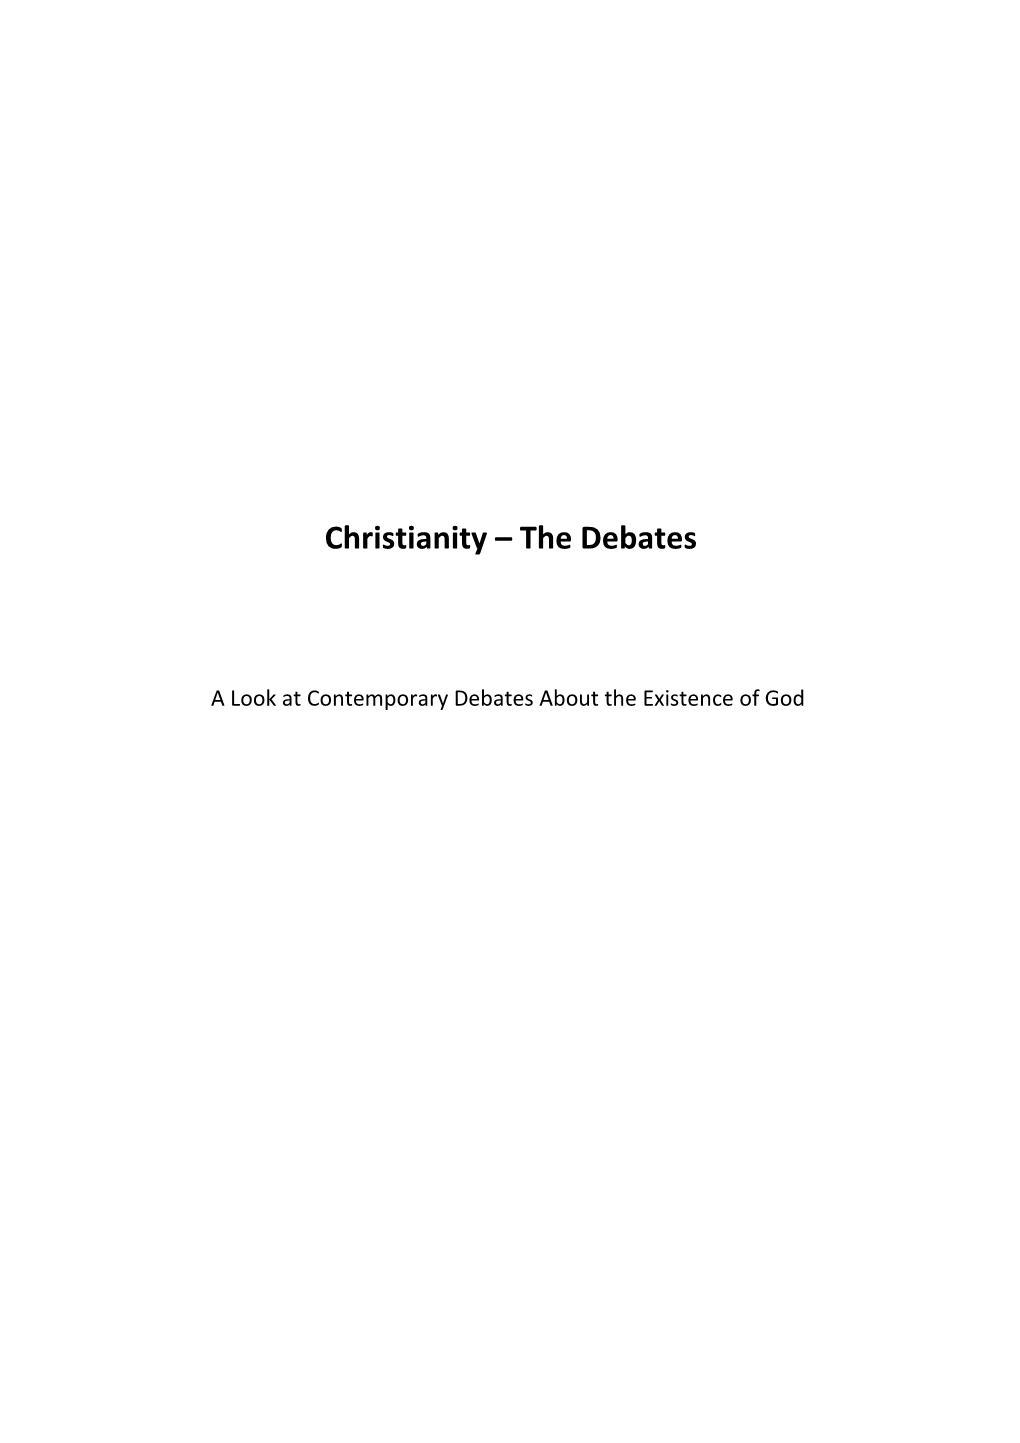 A Look at Contemporary Debates About the Existence of God